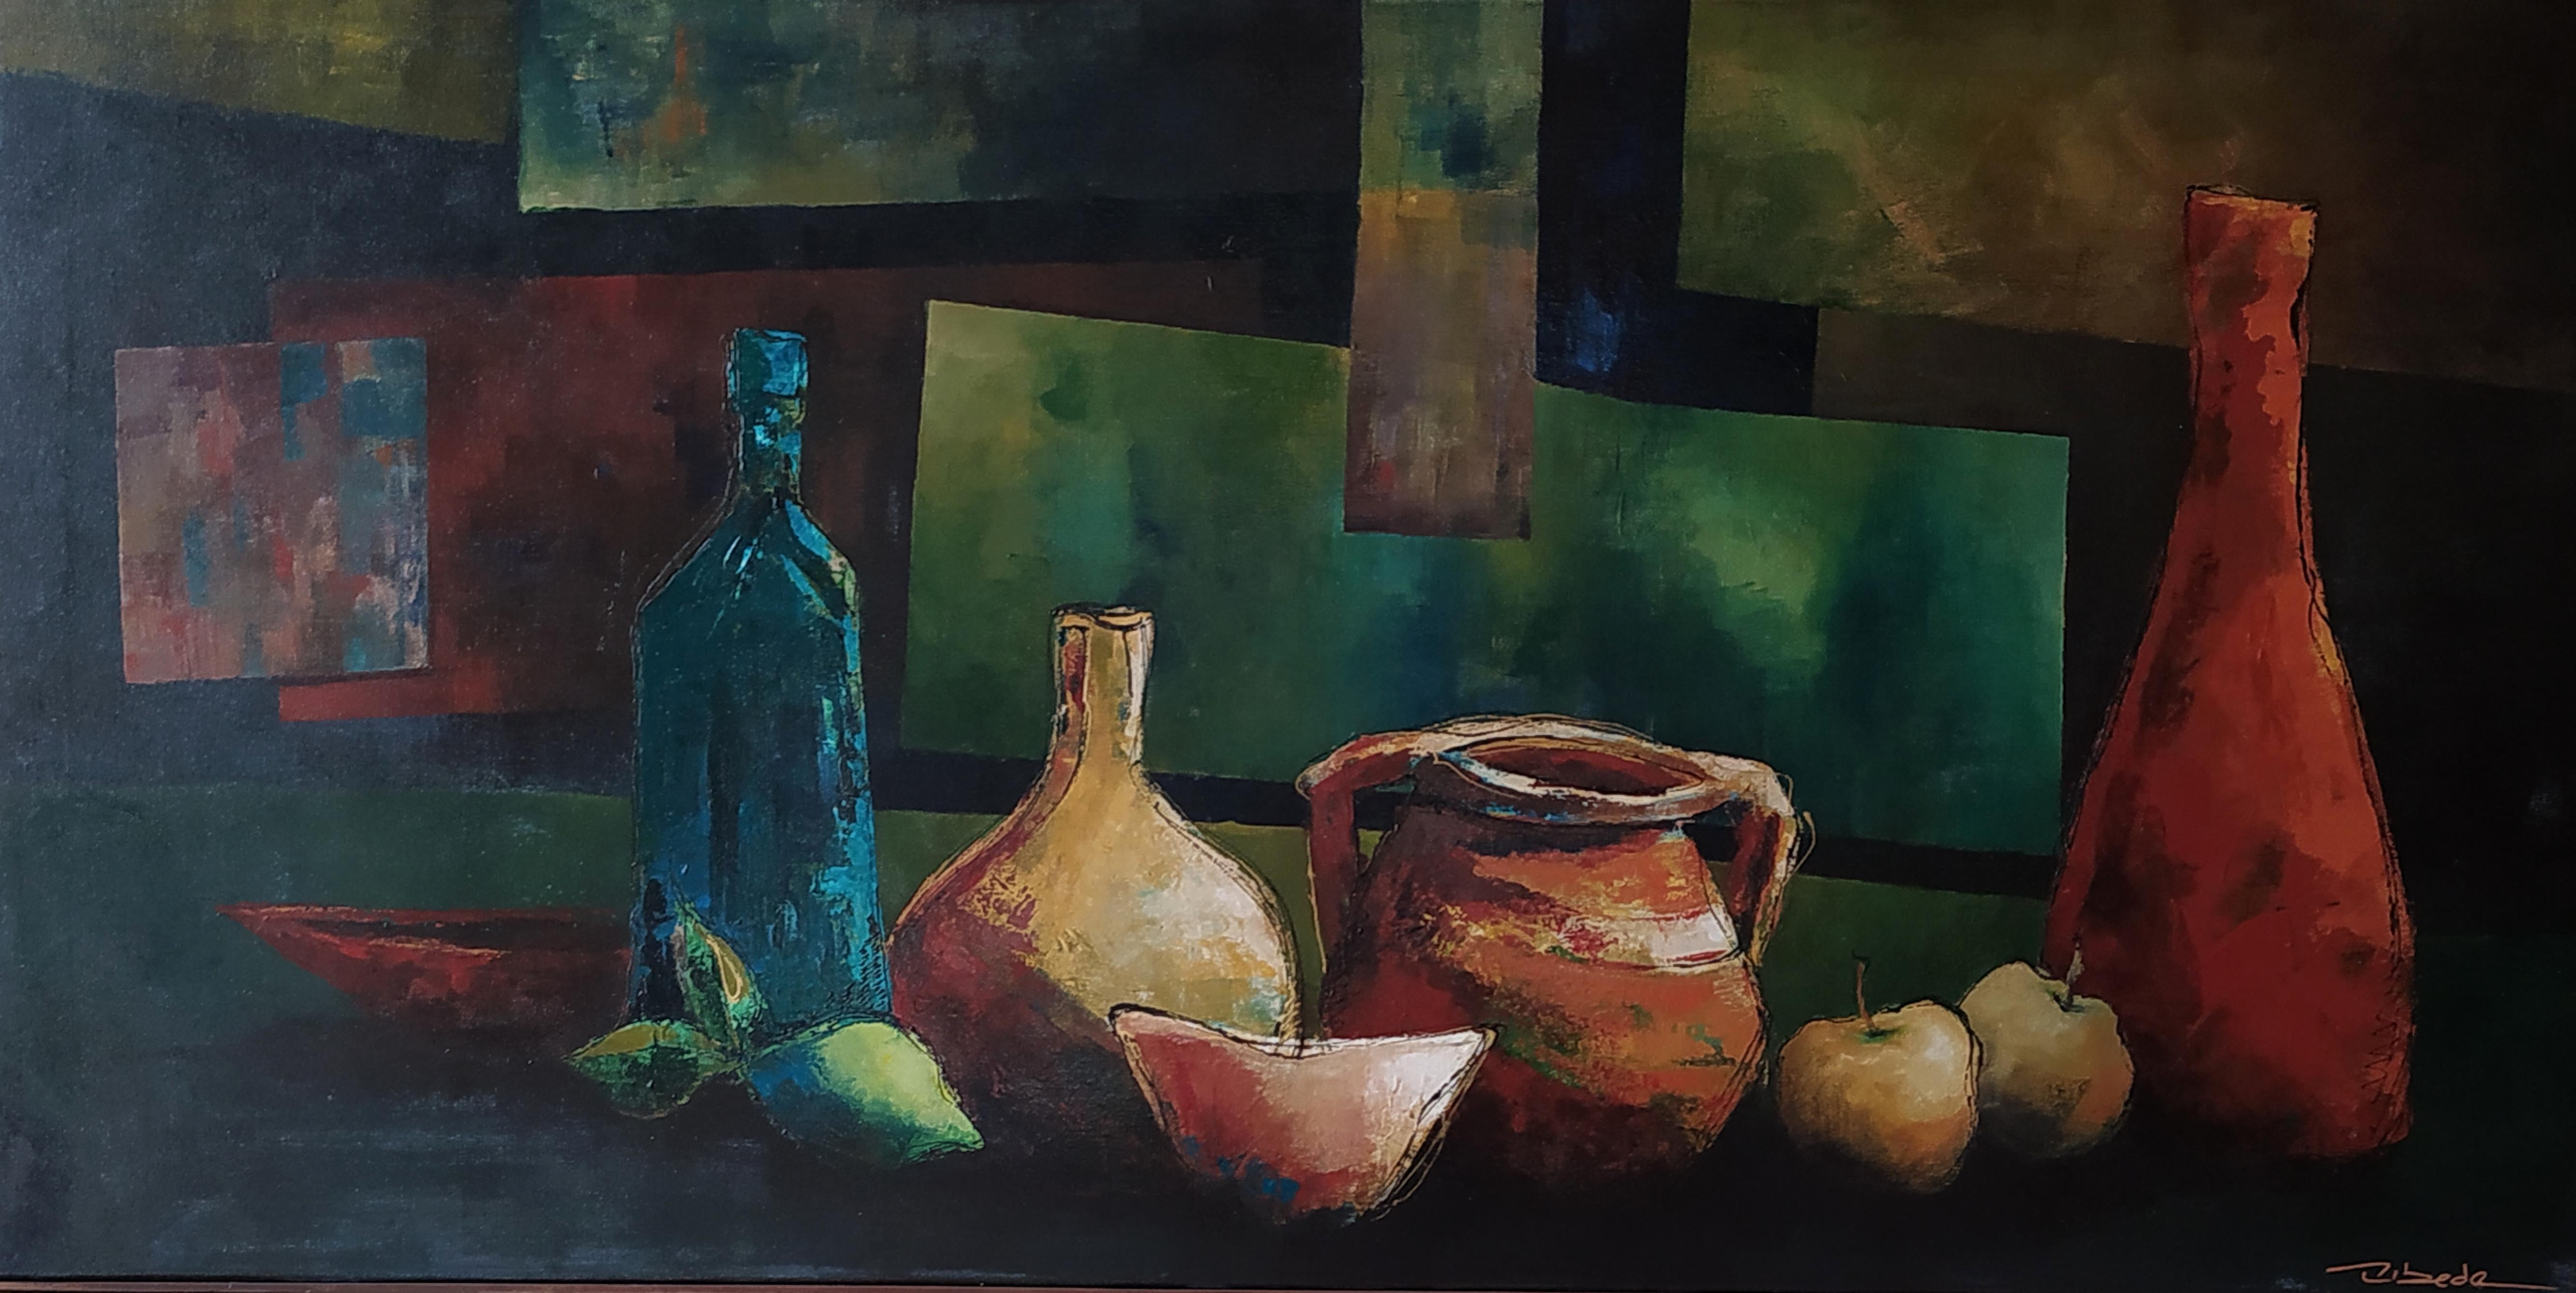 Ángel Luis Úbeda Figurative Painting - Modern Still-life Úbeda acrylic on canvas Perched of clay and glass